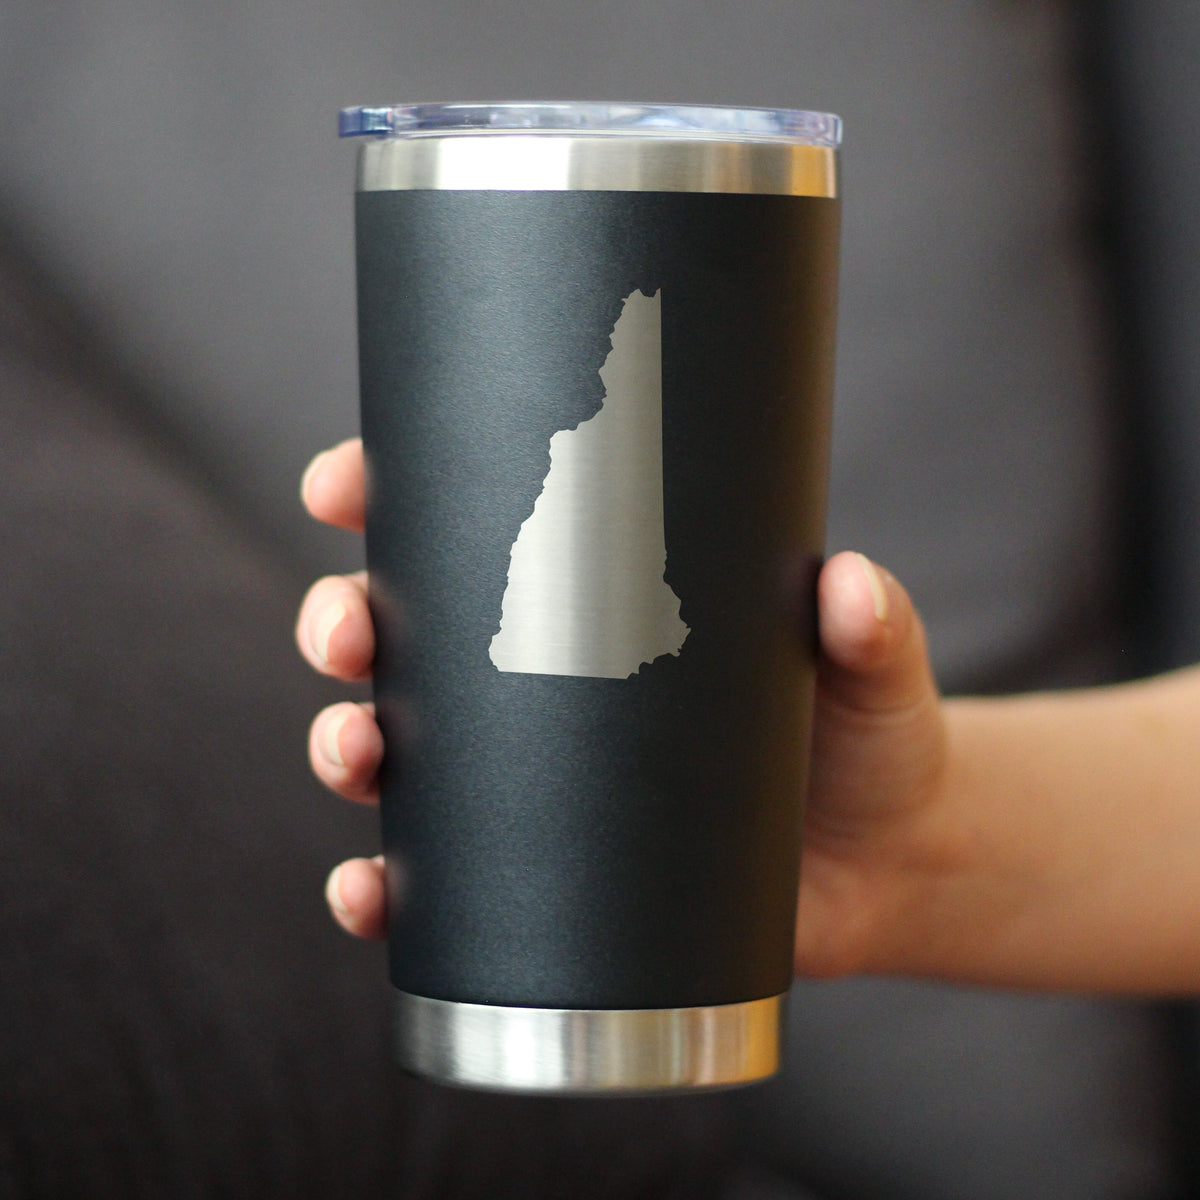 New Hampshire State Outline - Insulated Coffee Tumbler Cup with Sliding Lid - Stainless Steel Travel Mug - New Hampshire Gifts for Women and Men